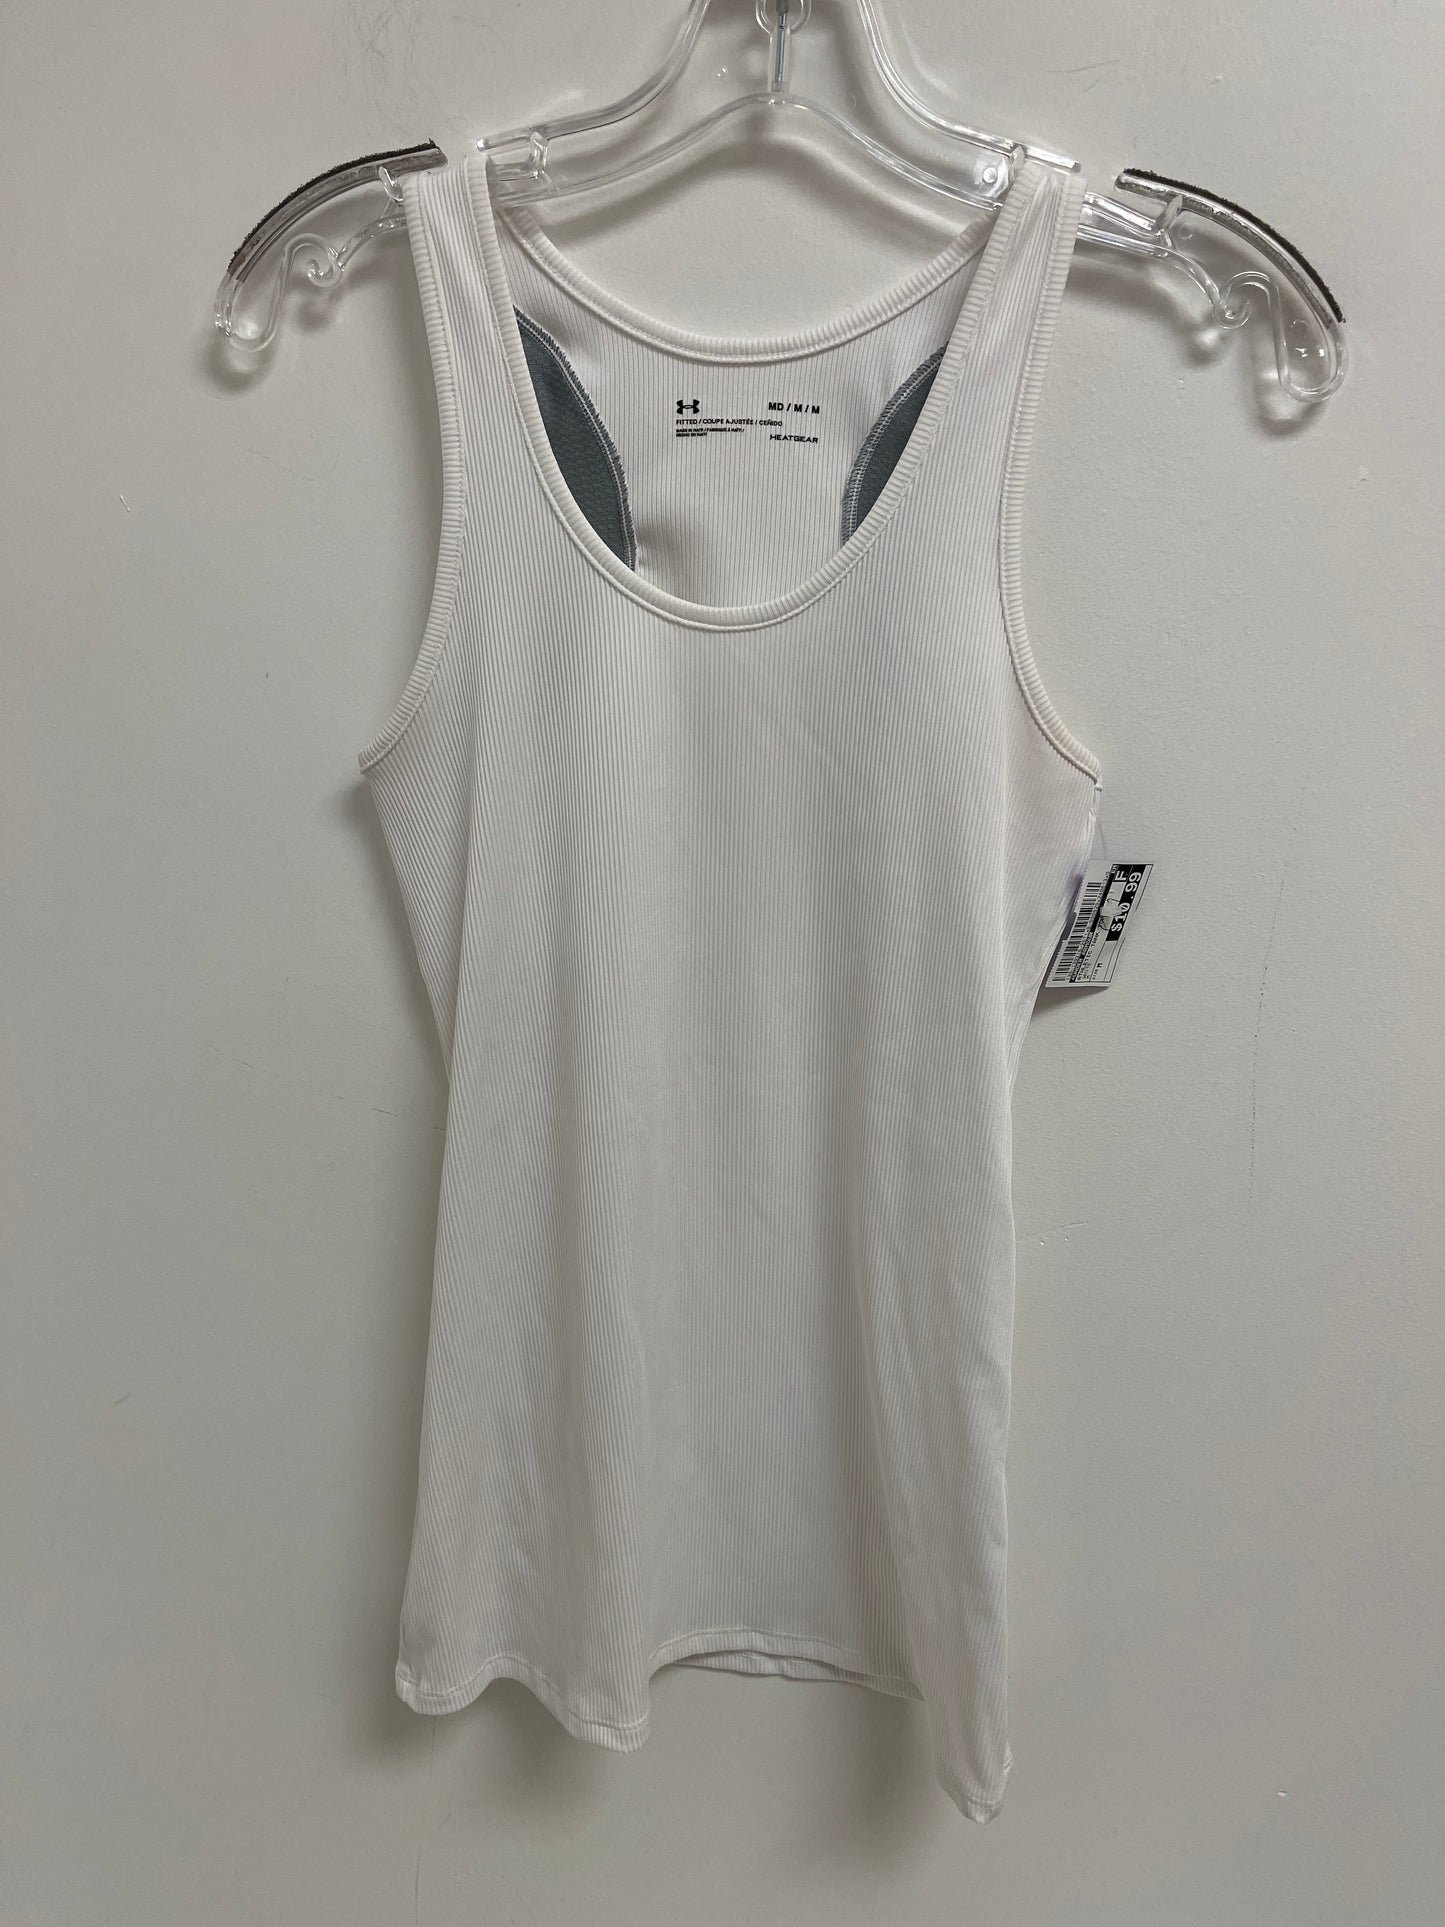 White Athletic Tank Top Under Armour, Size M